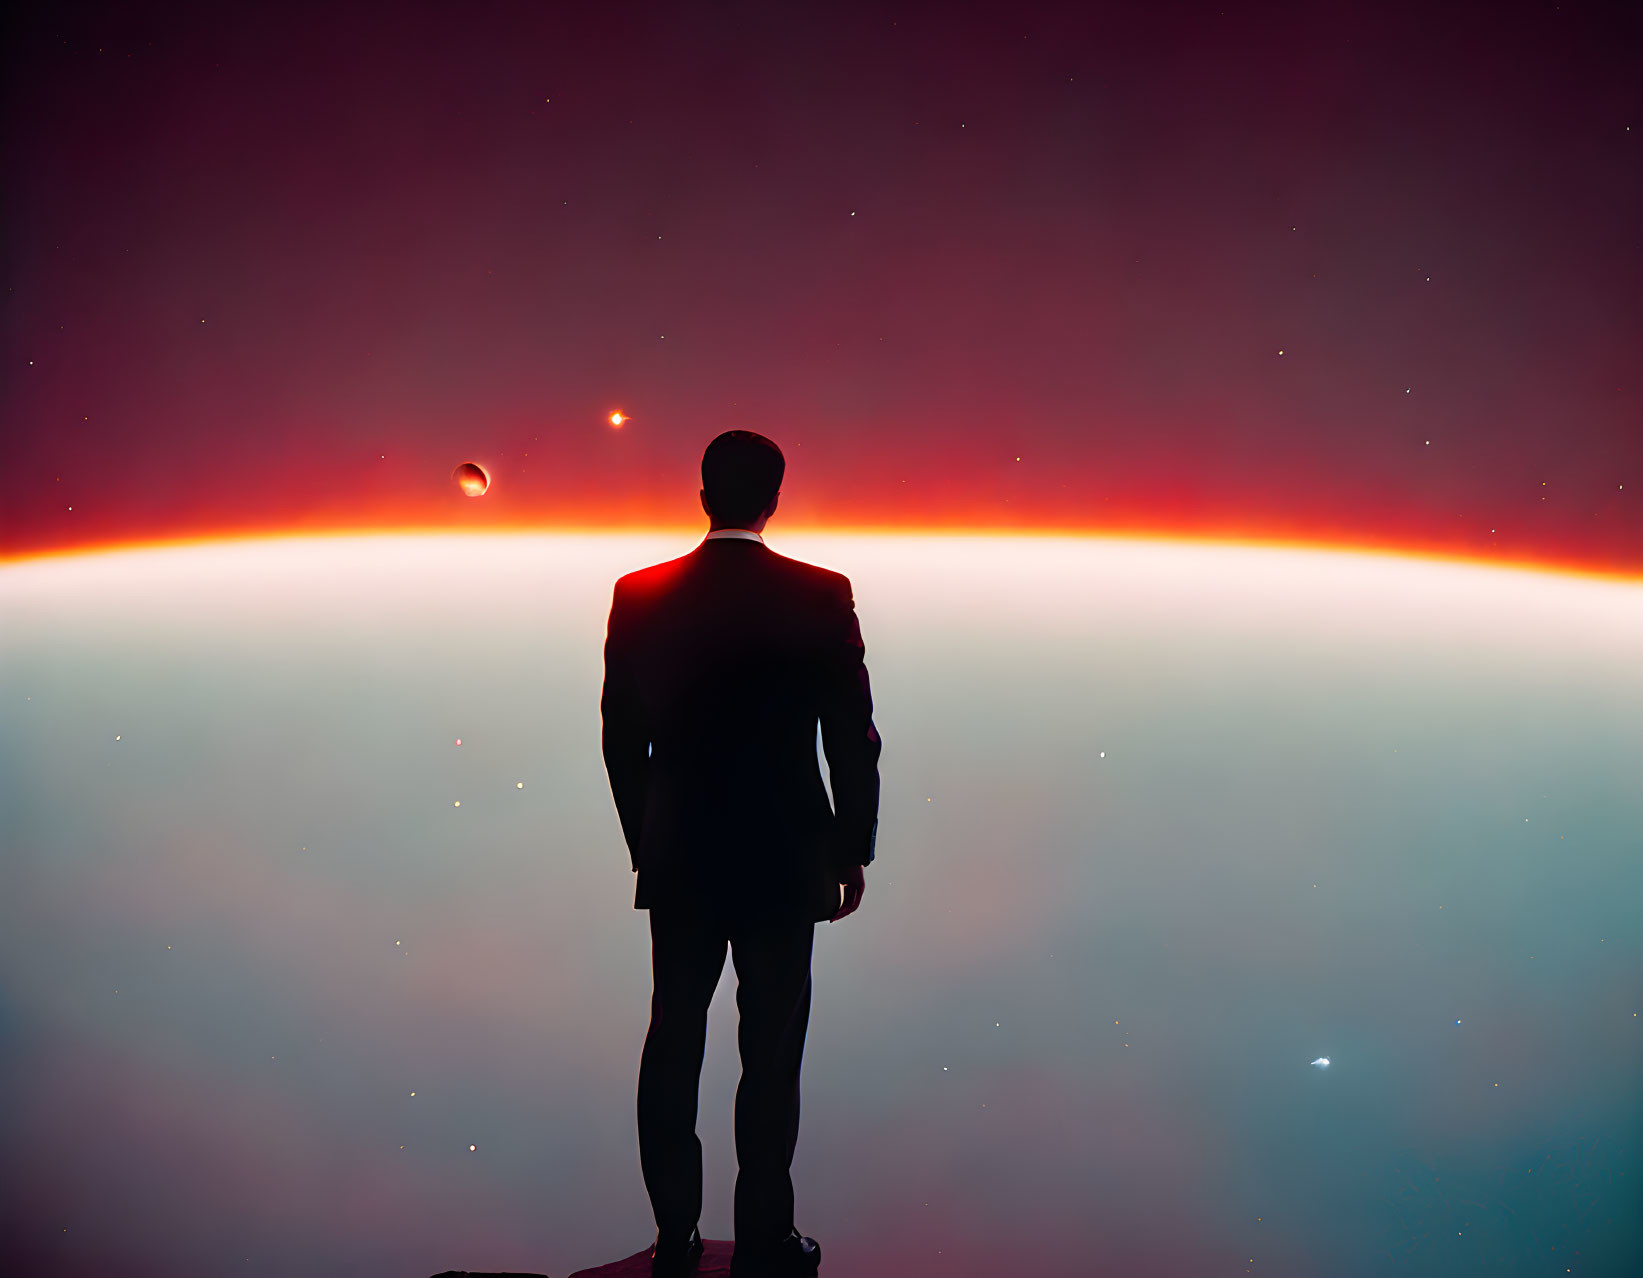 Silhouetted person against cosmic backdrop with vibrant horizon, planets, and stars